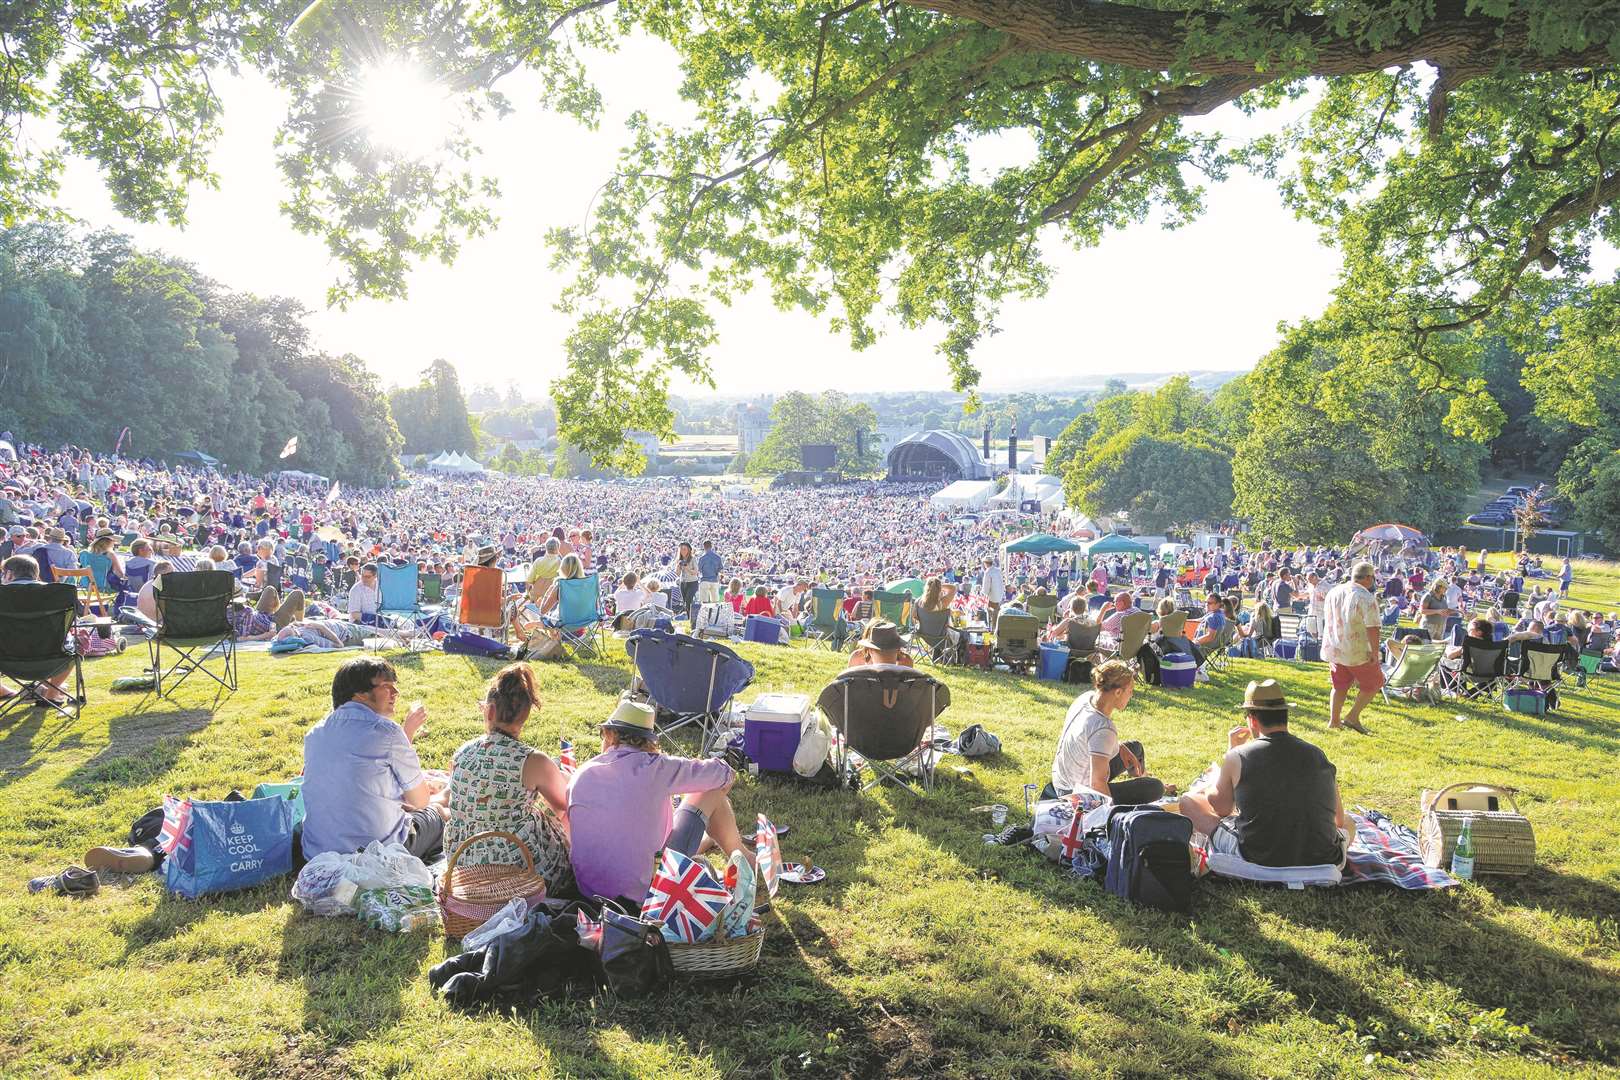 Leeds Castle Open Air Classical Concert 2015 attracts thousands to